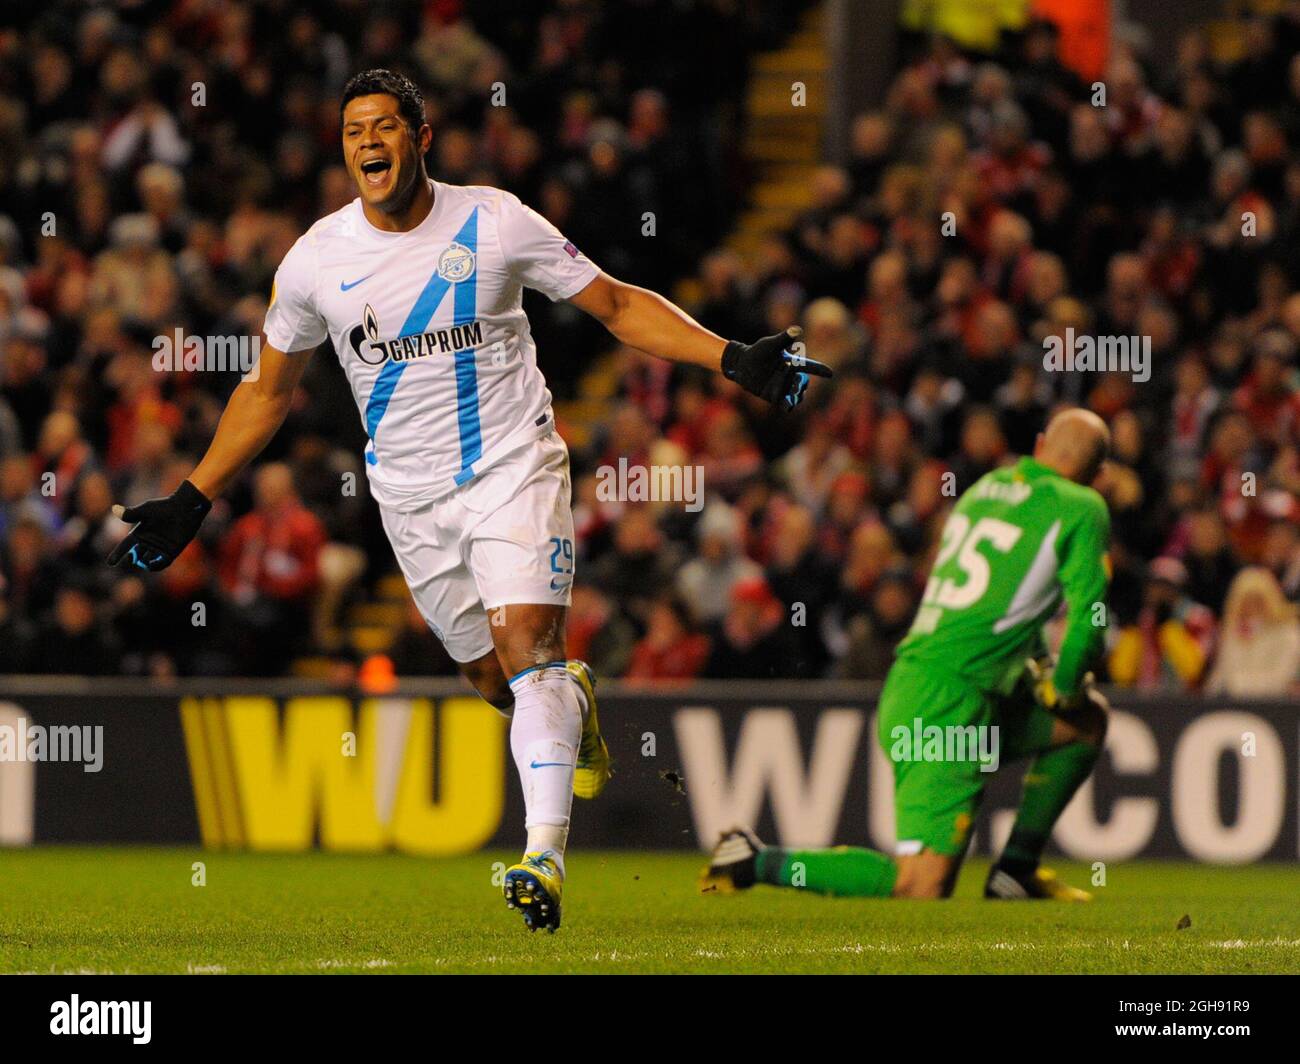 Hulk of Zenit St Petersburg celebrates scoring the first goal during the UEFA Europa League Round of 32, Second Leg match between Liverpool and Zenit St Petersburg at the Anfield Stadium in Liverpool, United Kingdom on February 21, 2013. Stock Photo